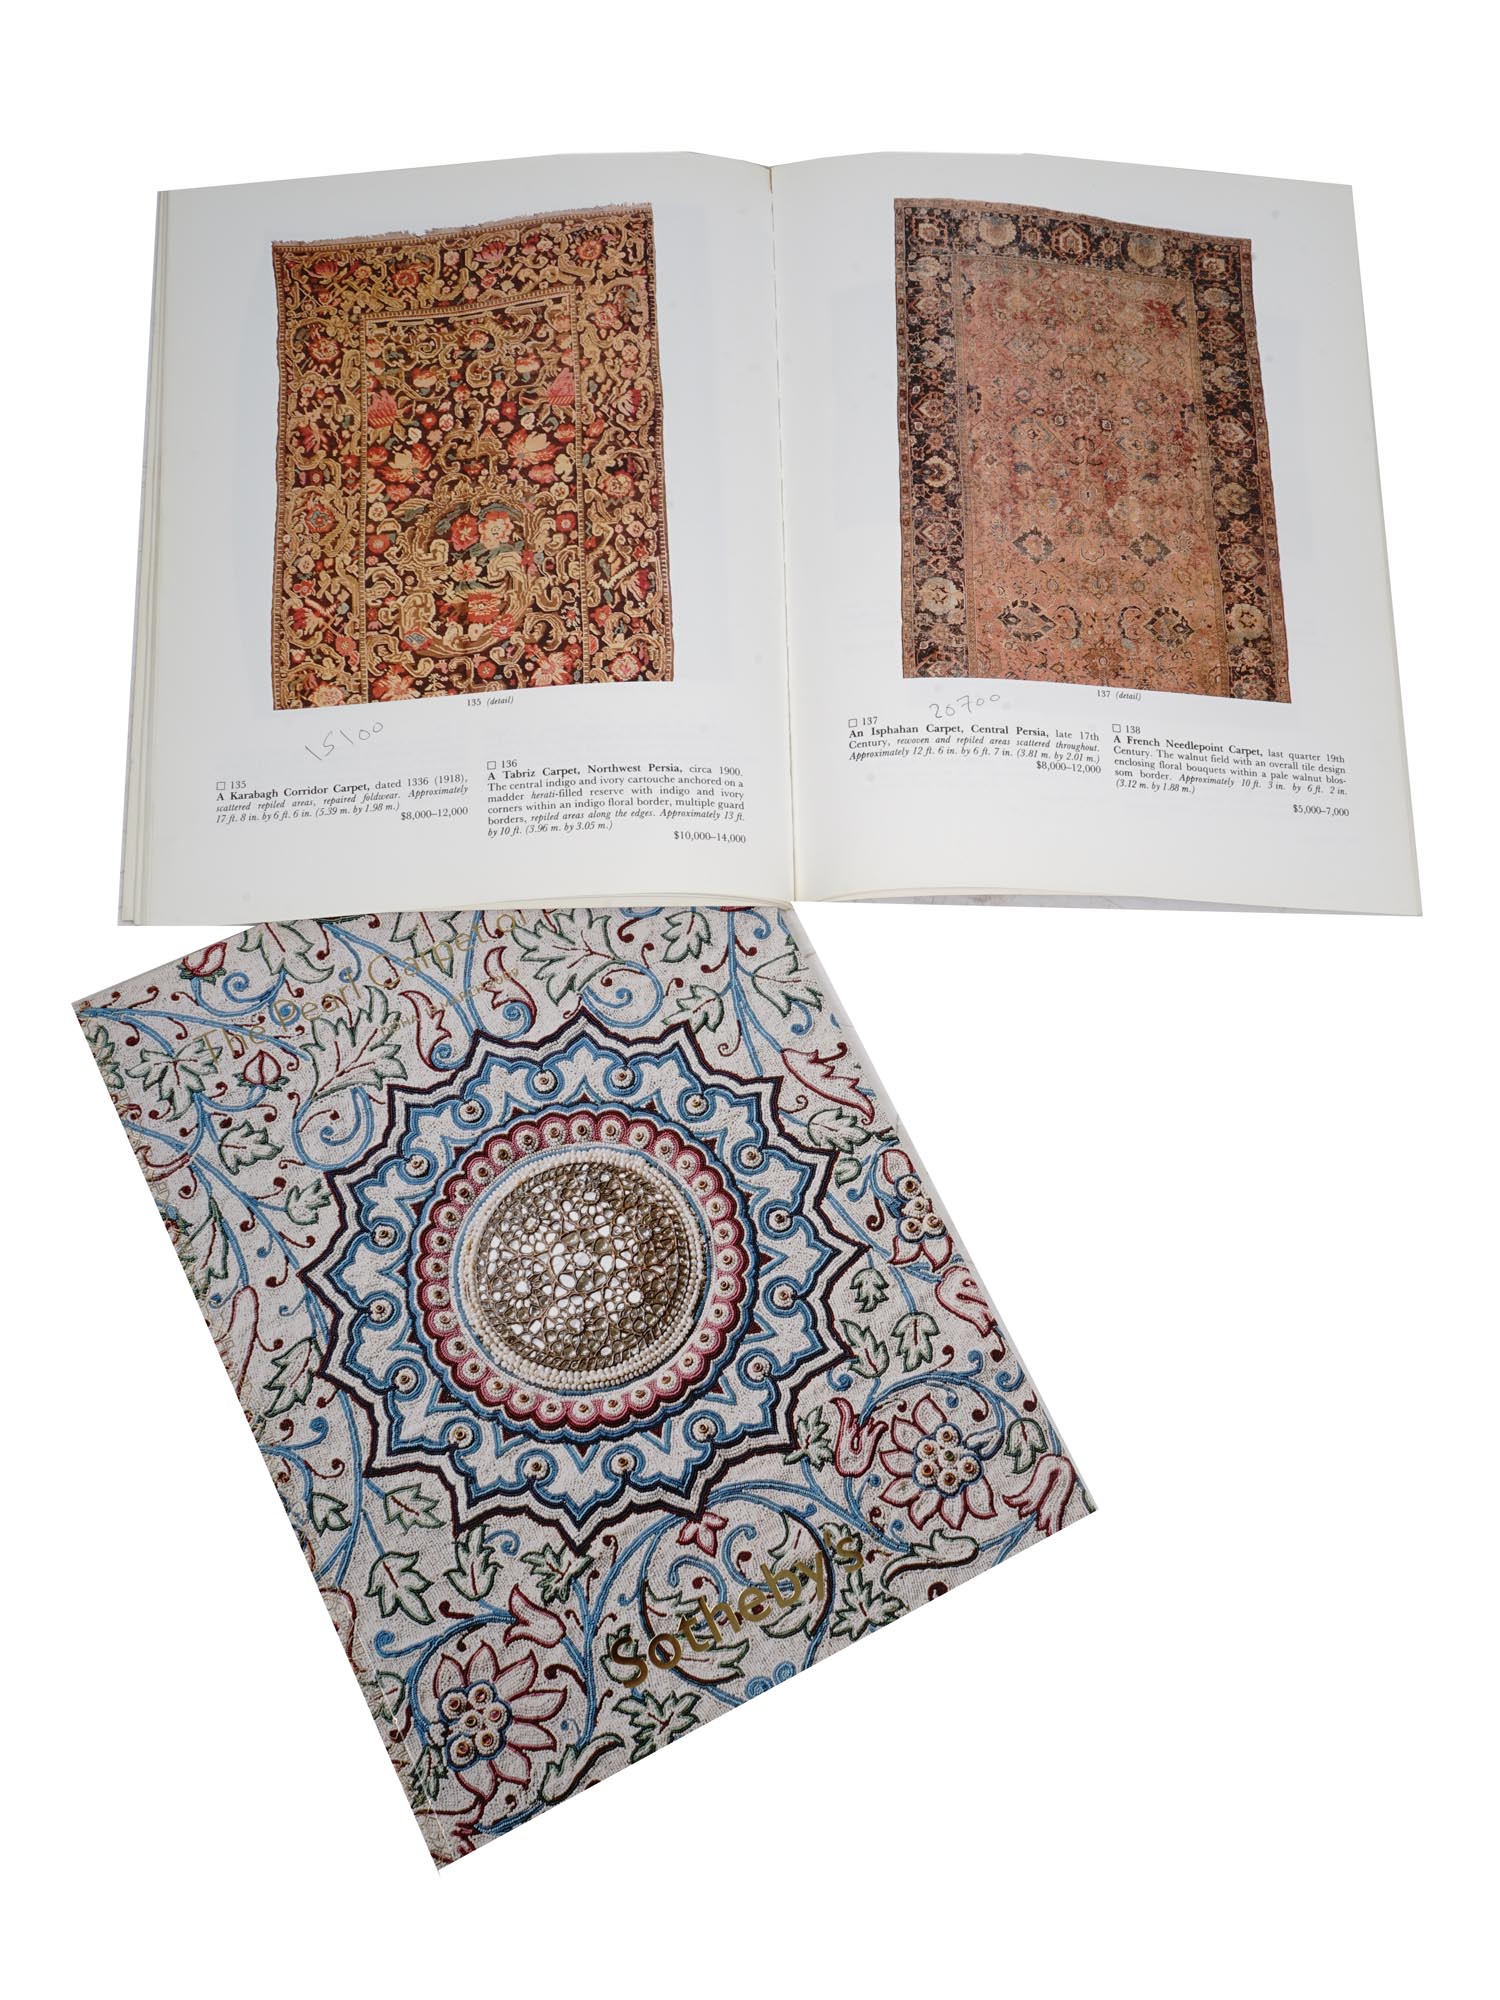 VINTAGE CHRISTIES SOTHEBYS RUG CATALOG COLLECTION PIC-7